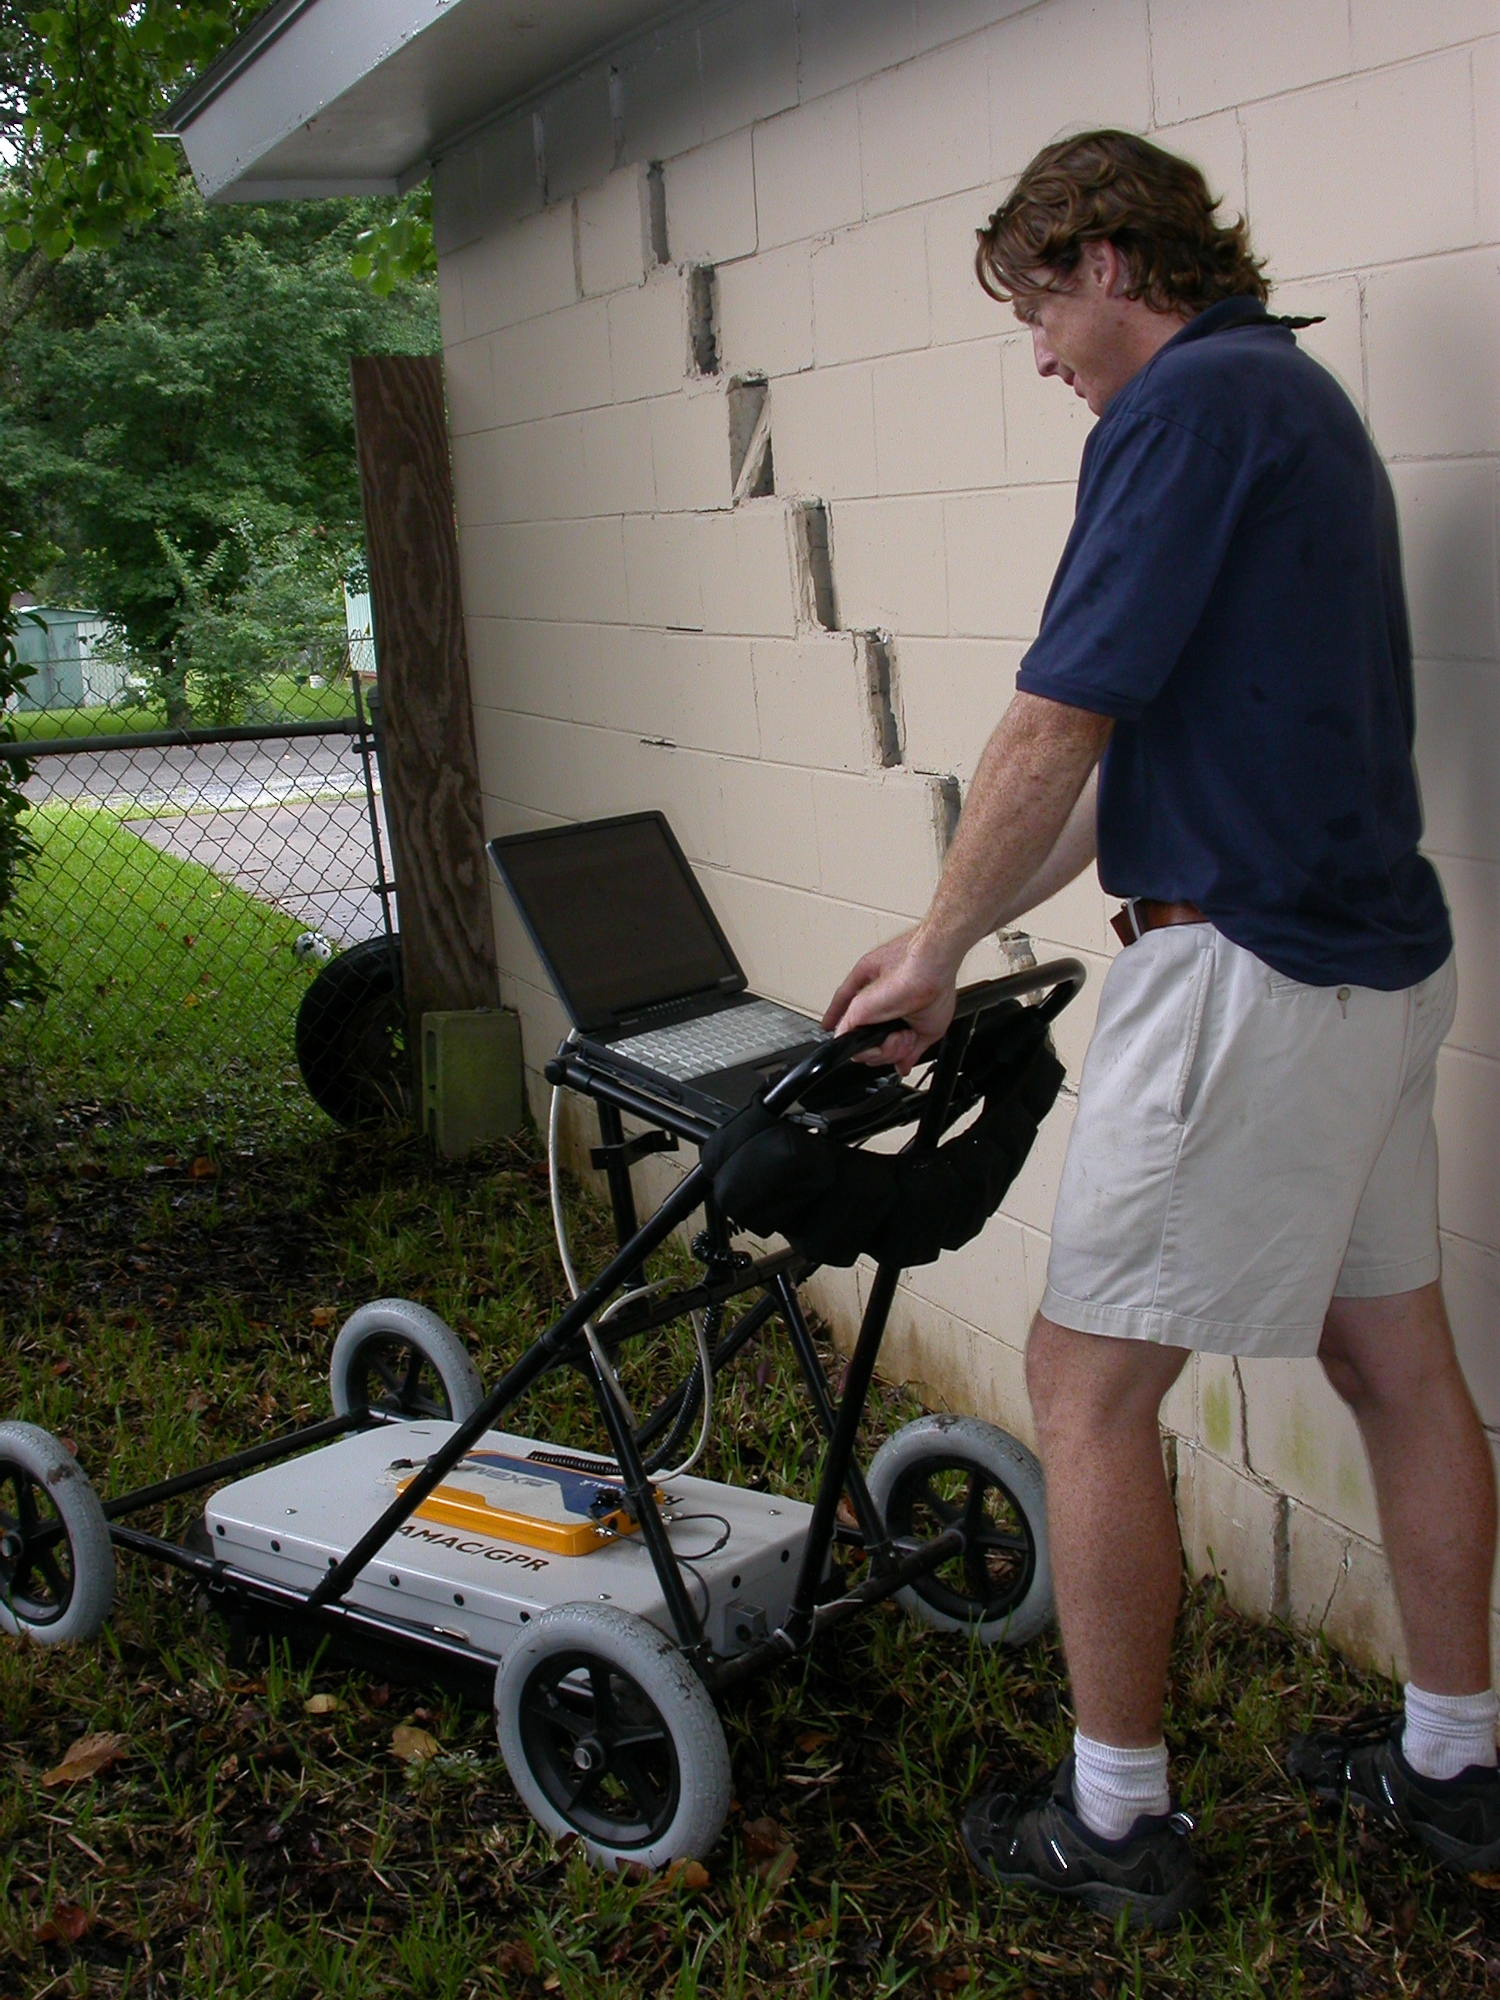 GPR survey of a residential property with sinkhole damage